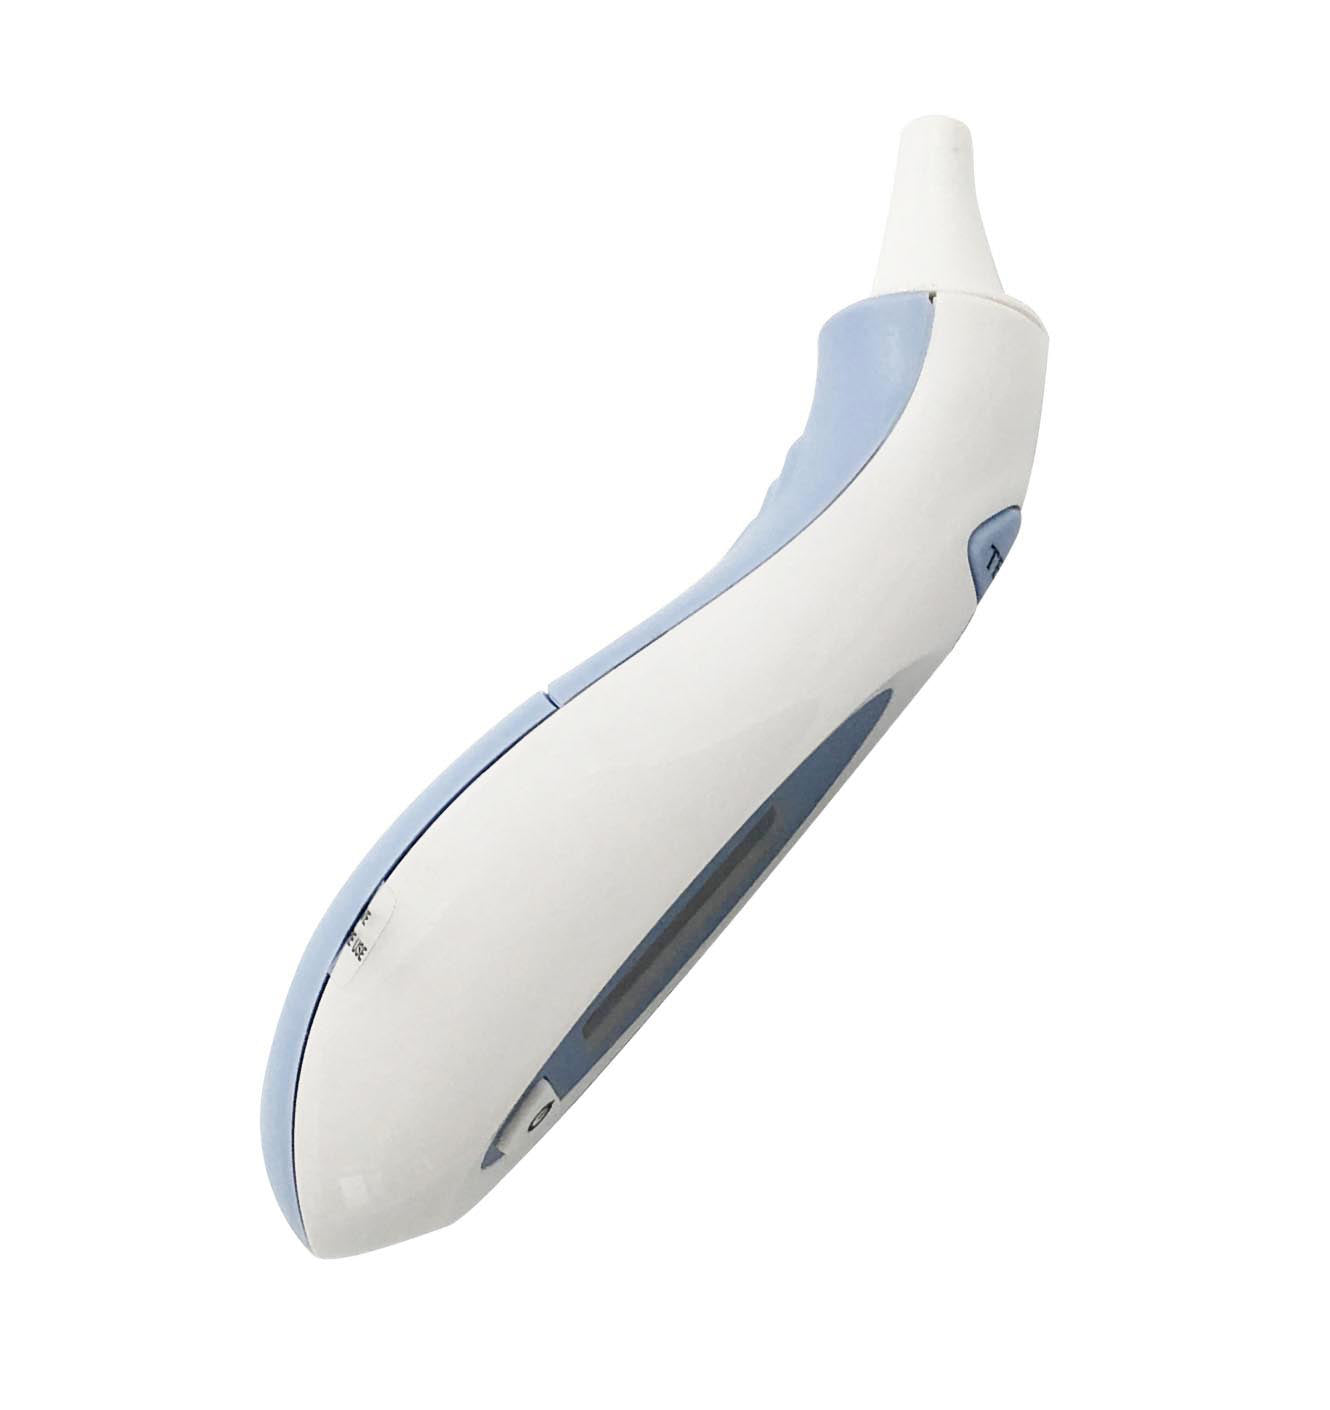 Infrared Ear Thermometer-UW-DET-102